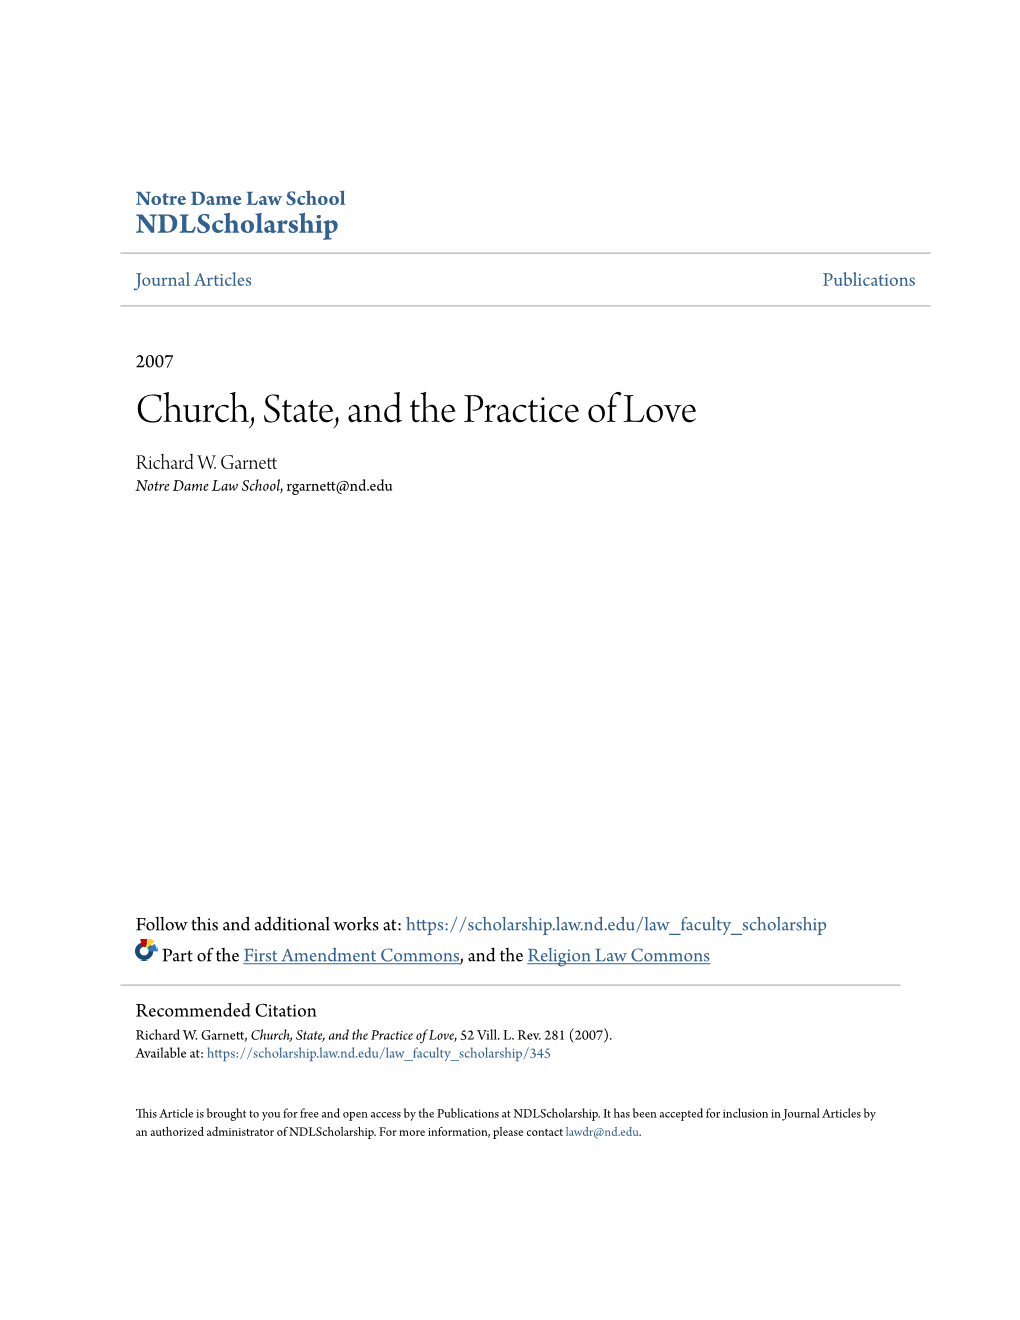 Church, State, and the Practice of Love Richard W